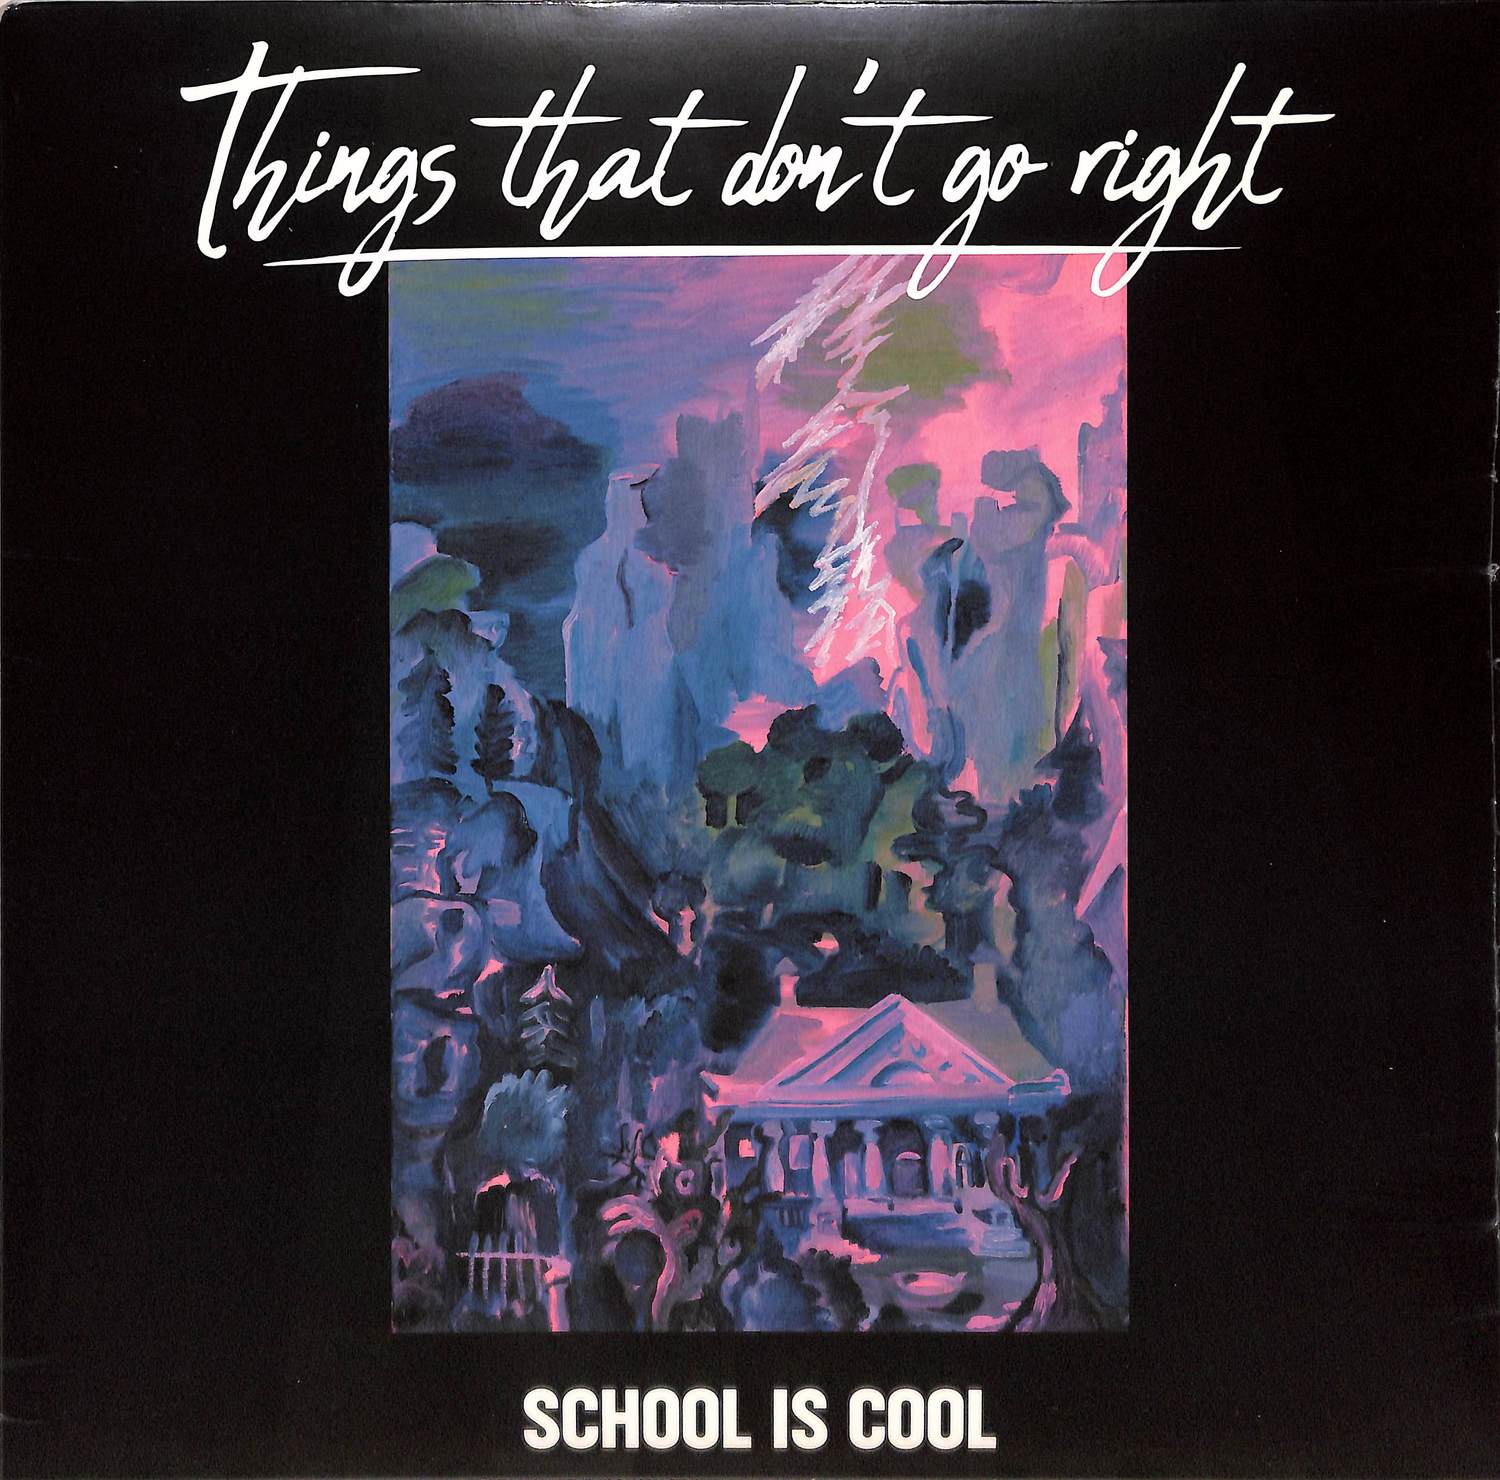 School Is Cool - THINGS THAT DONT GO RIGHT 